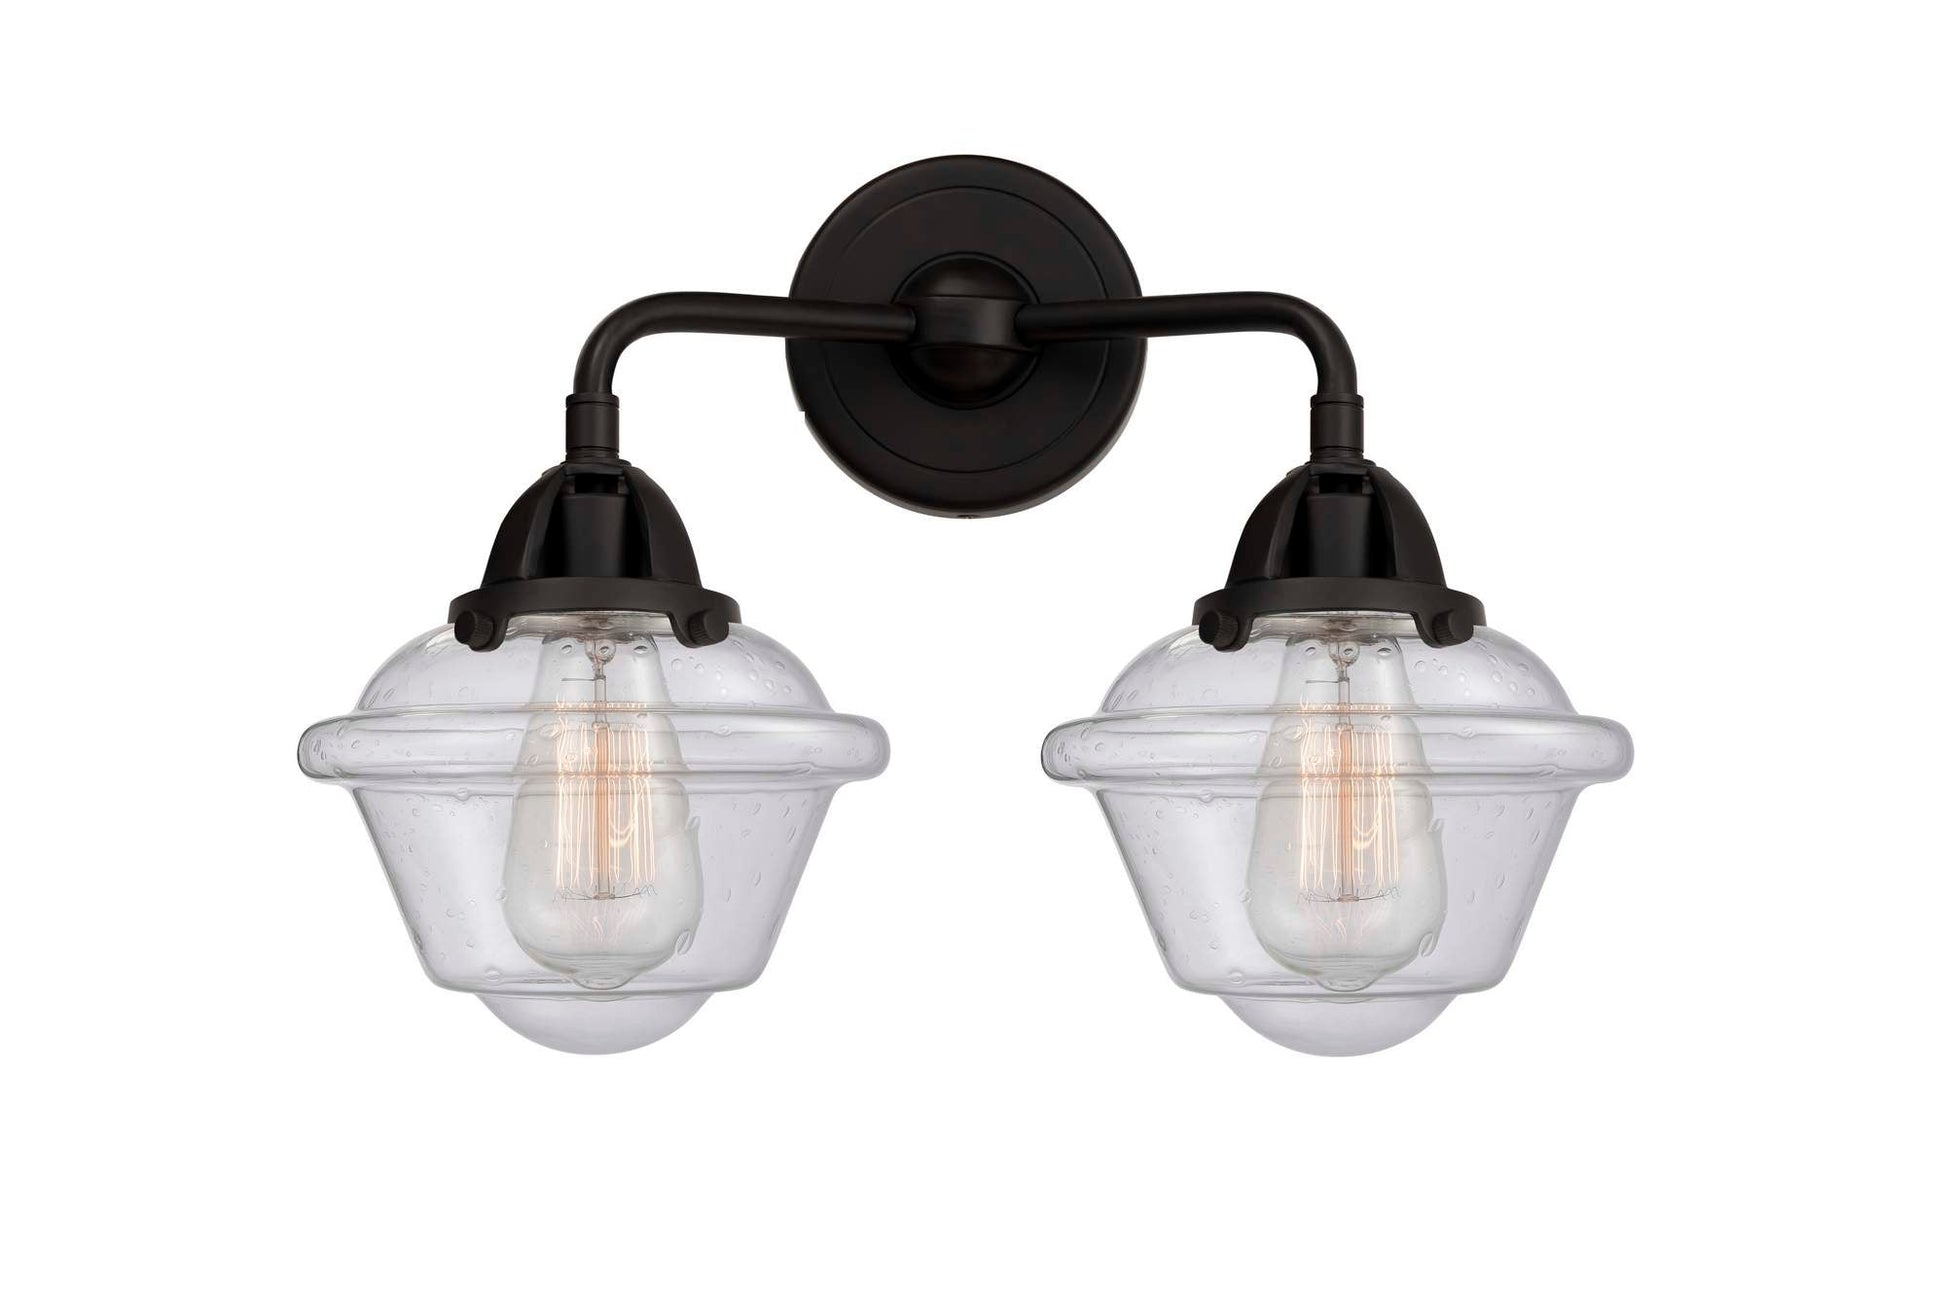 288-2W-BK-G534 2-Light 15.5" Matte Black Bath Vanity Light - Seedy Small Oxford Glass - LED Bulb - Dimmensions: 15.5 x 8 x 12.125 - Glass Up or Down: Yes